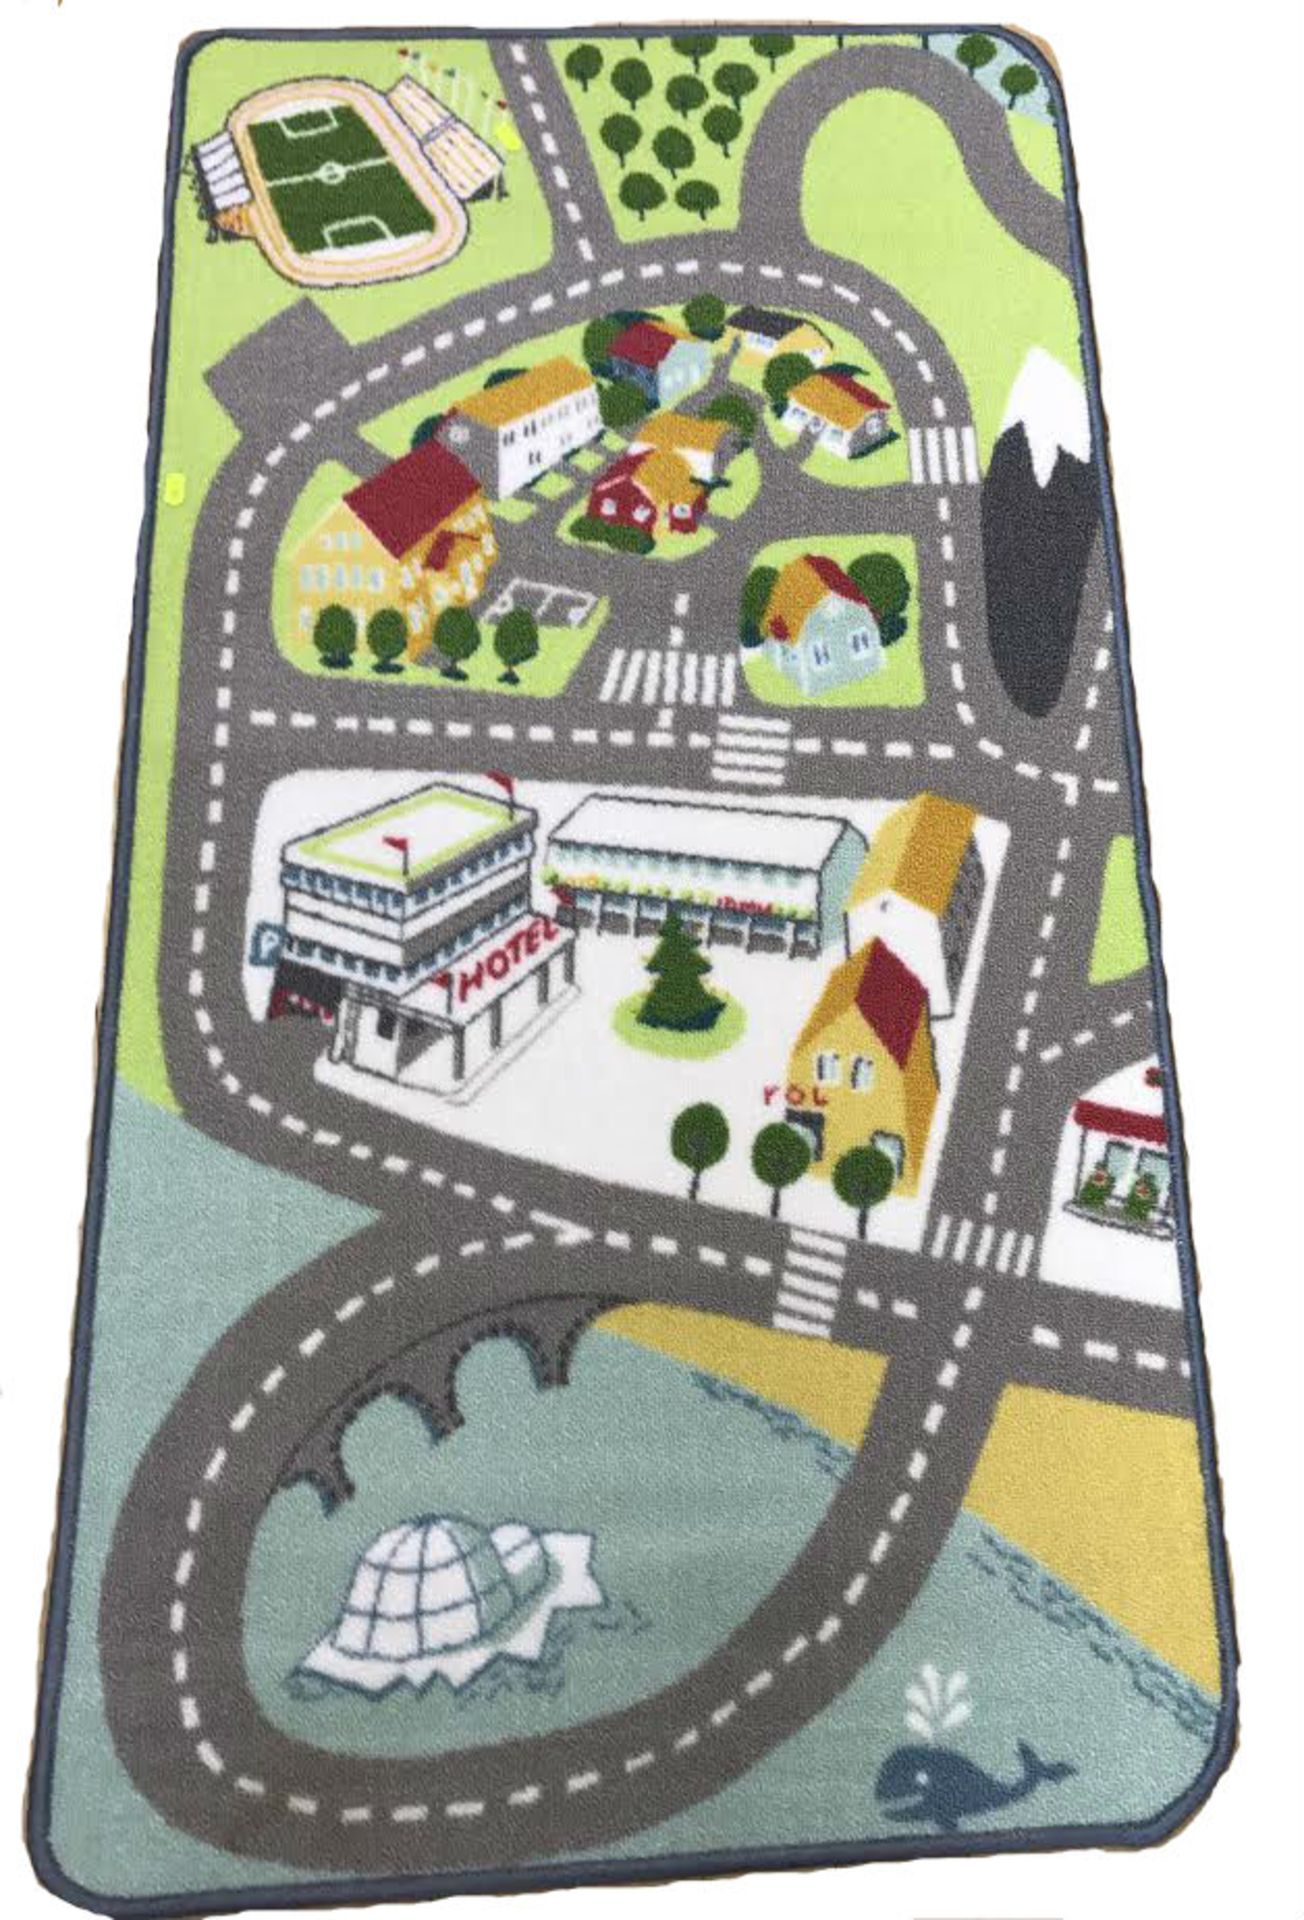 V Brand New 133 x 70cm Childrens Play mat with Roads - Countryside - mountains and buildings -